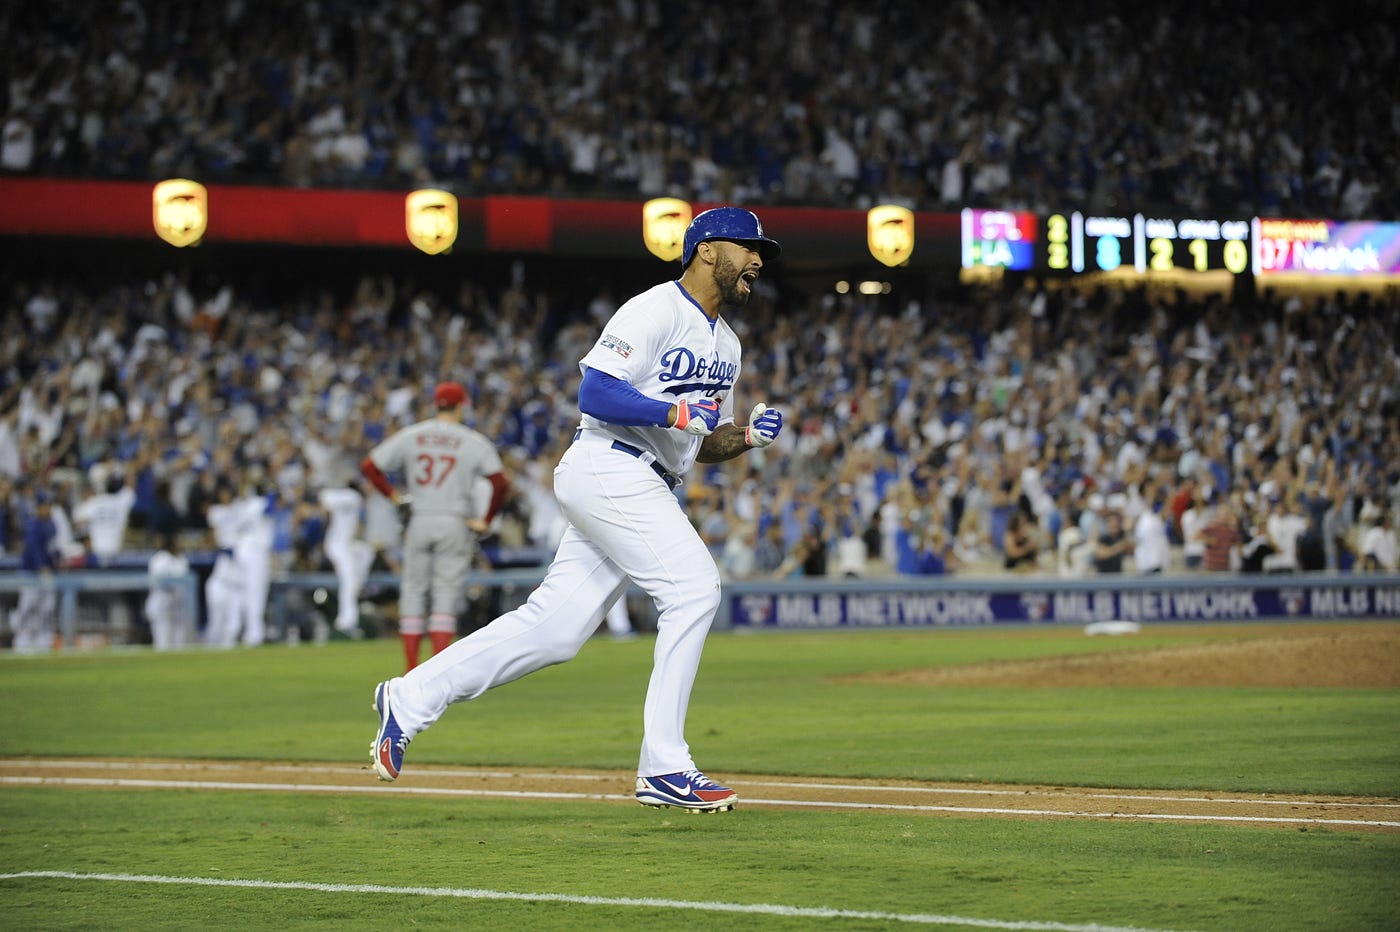 Chris Hatcher earns Dodgers' first save in place of Kenley Jansen